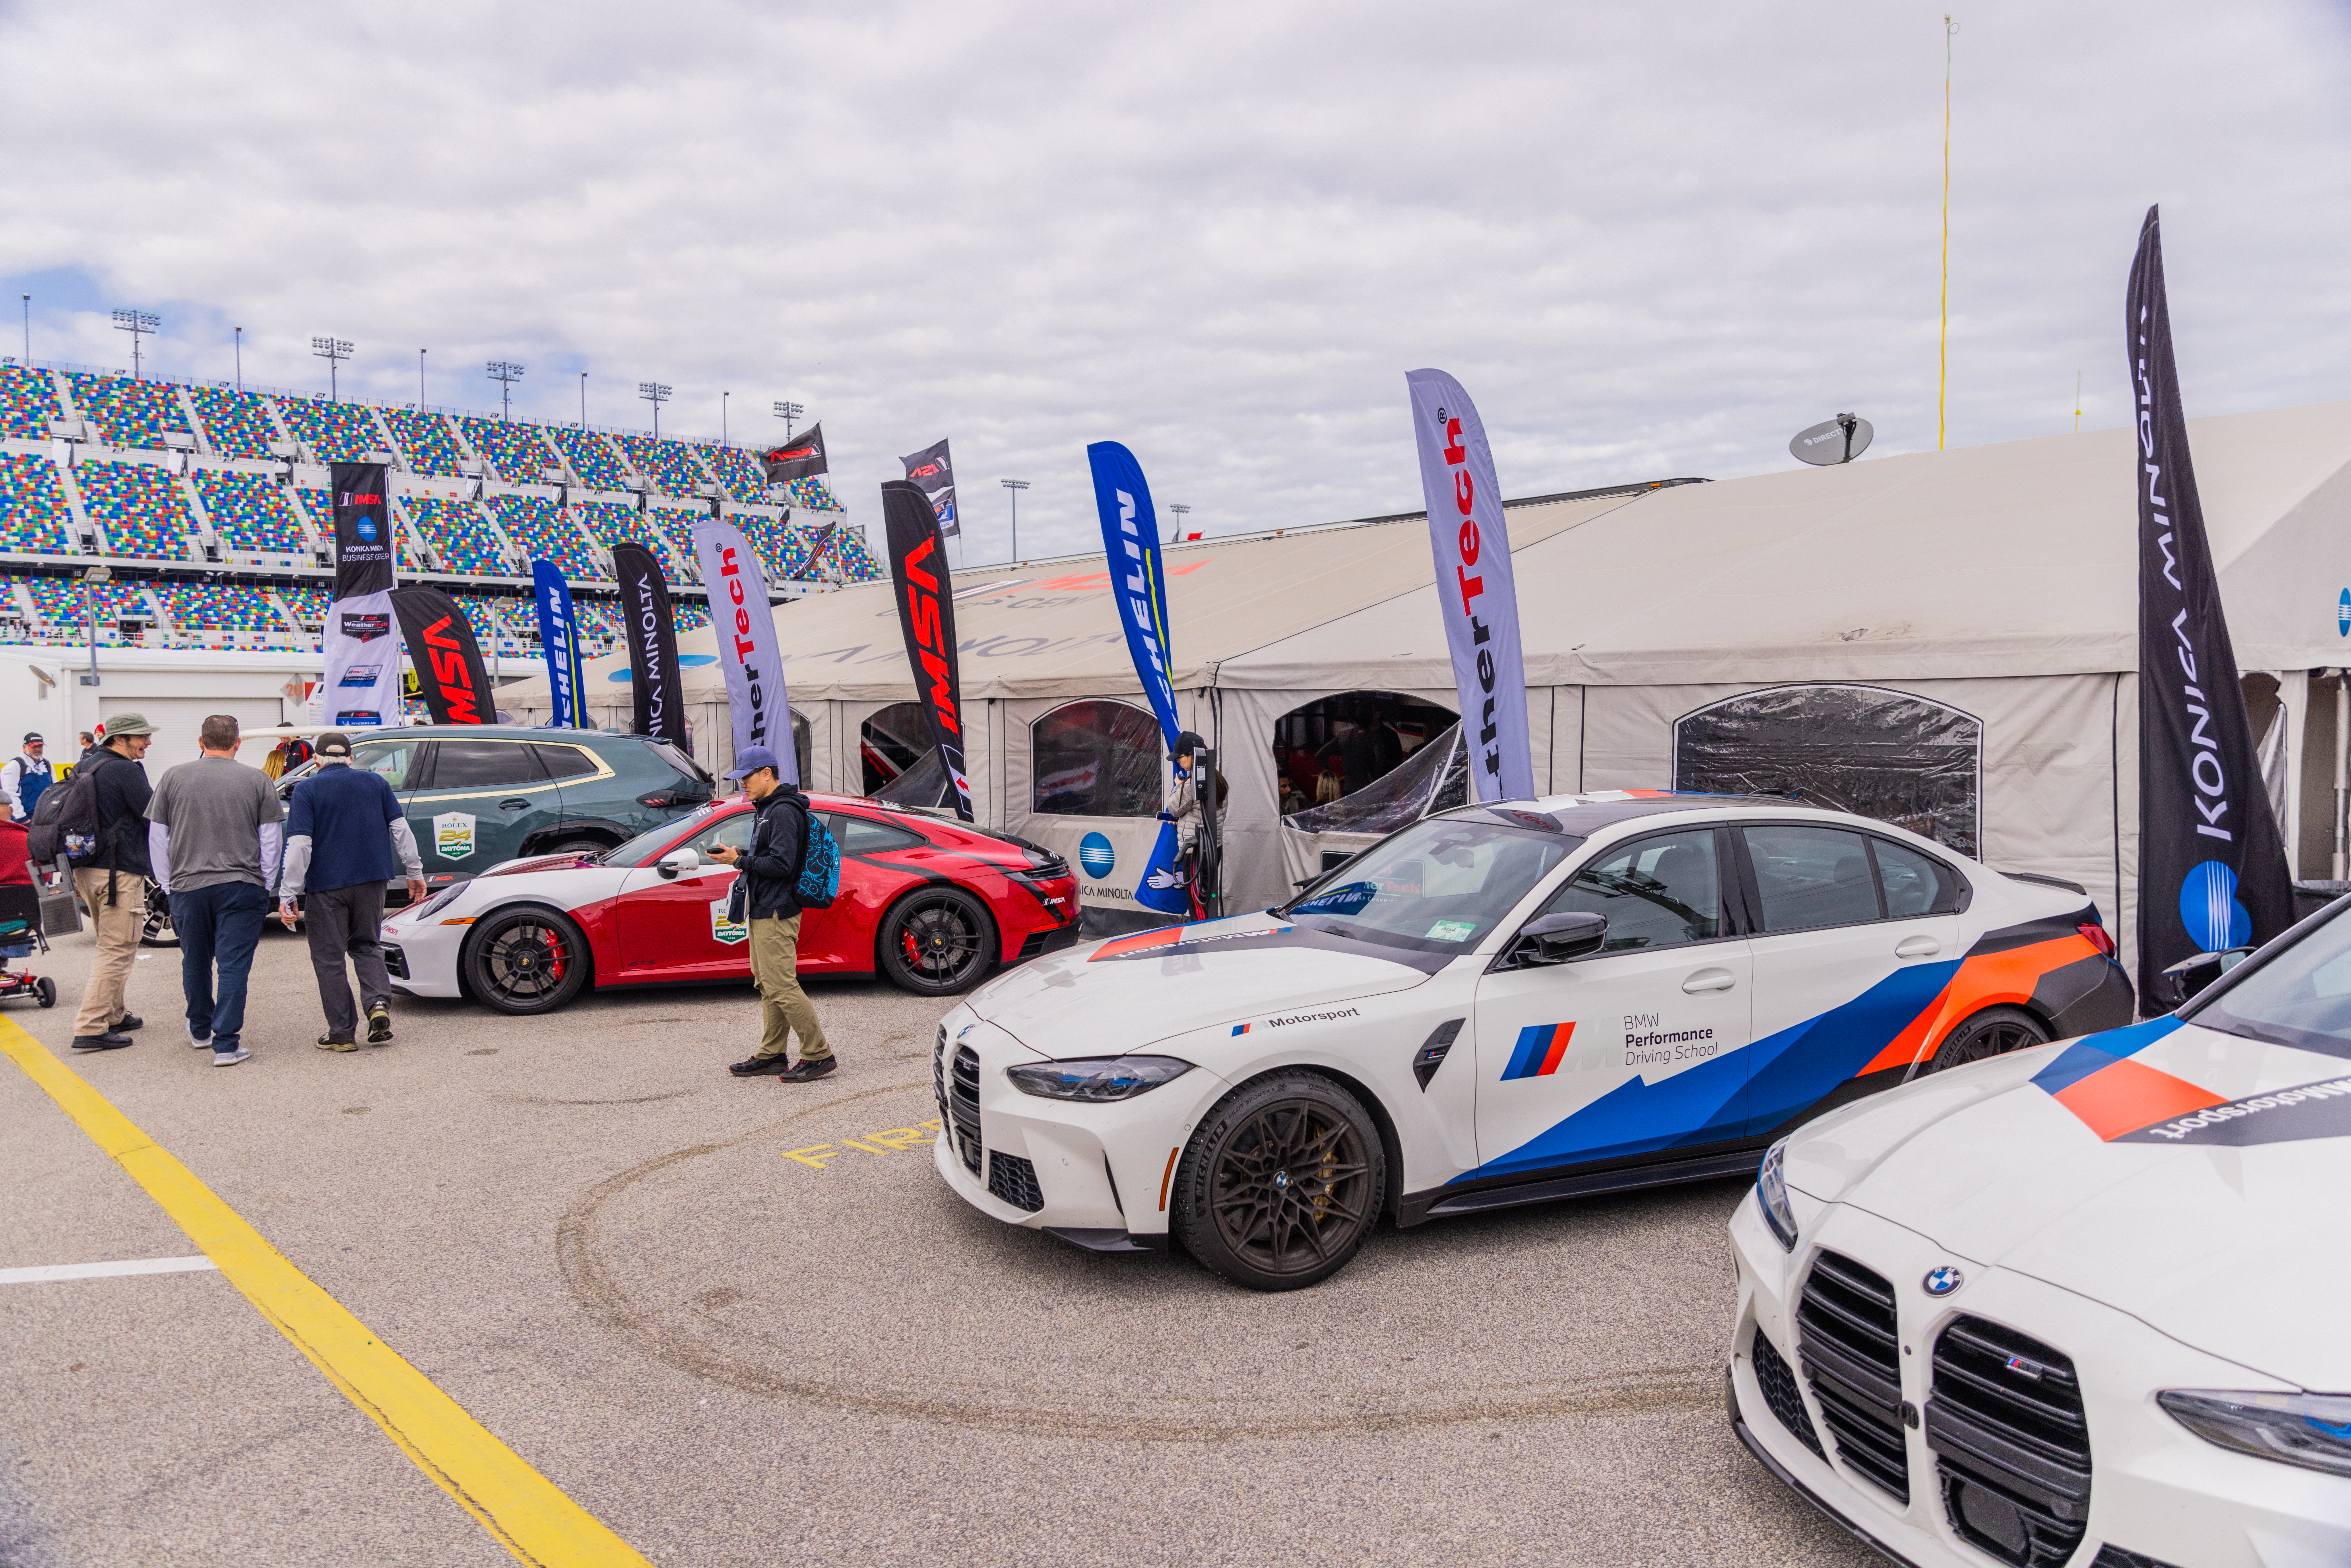 IMSA Racing and Battle Born Batteries showcase the power of lithium ion batteries at the Rolex 24 with Bmw among other electric vehicle manufacturers